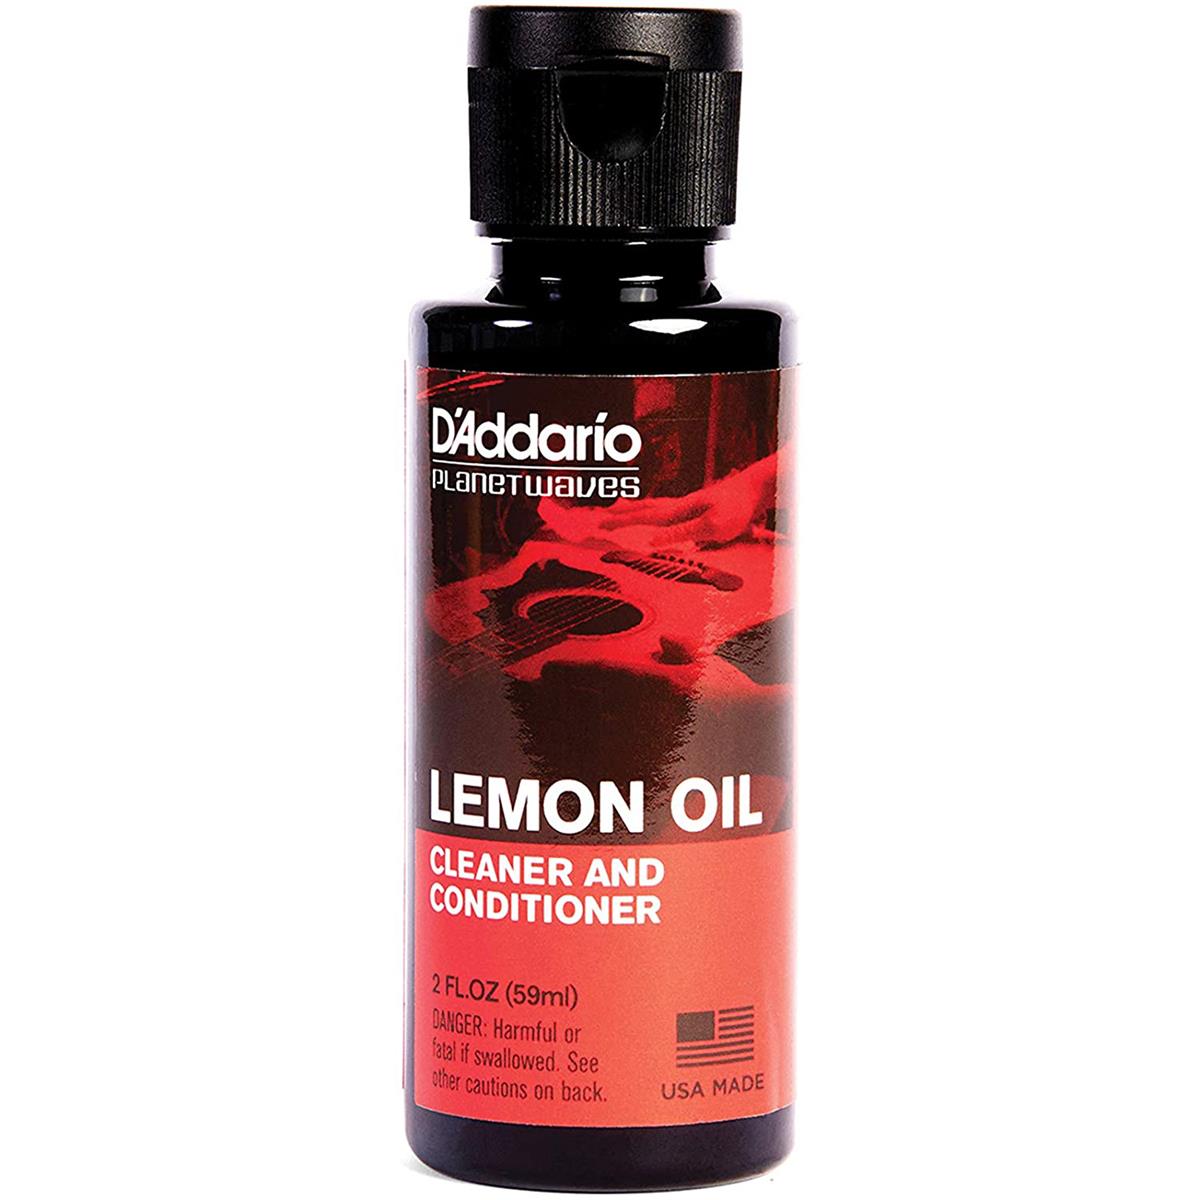 Image of D'Addario Lemon Oil Cleaner and Conditioner